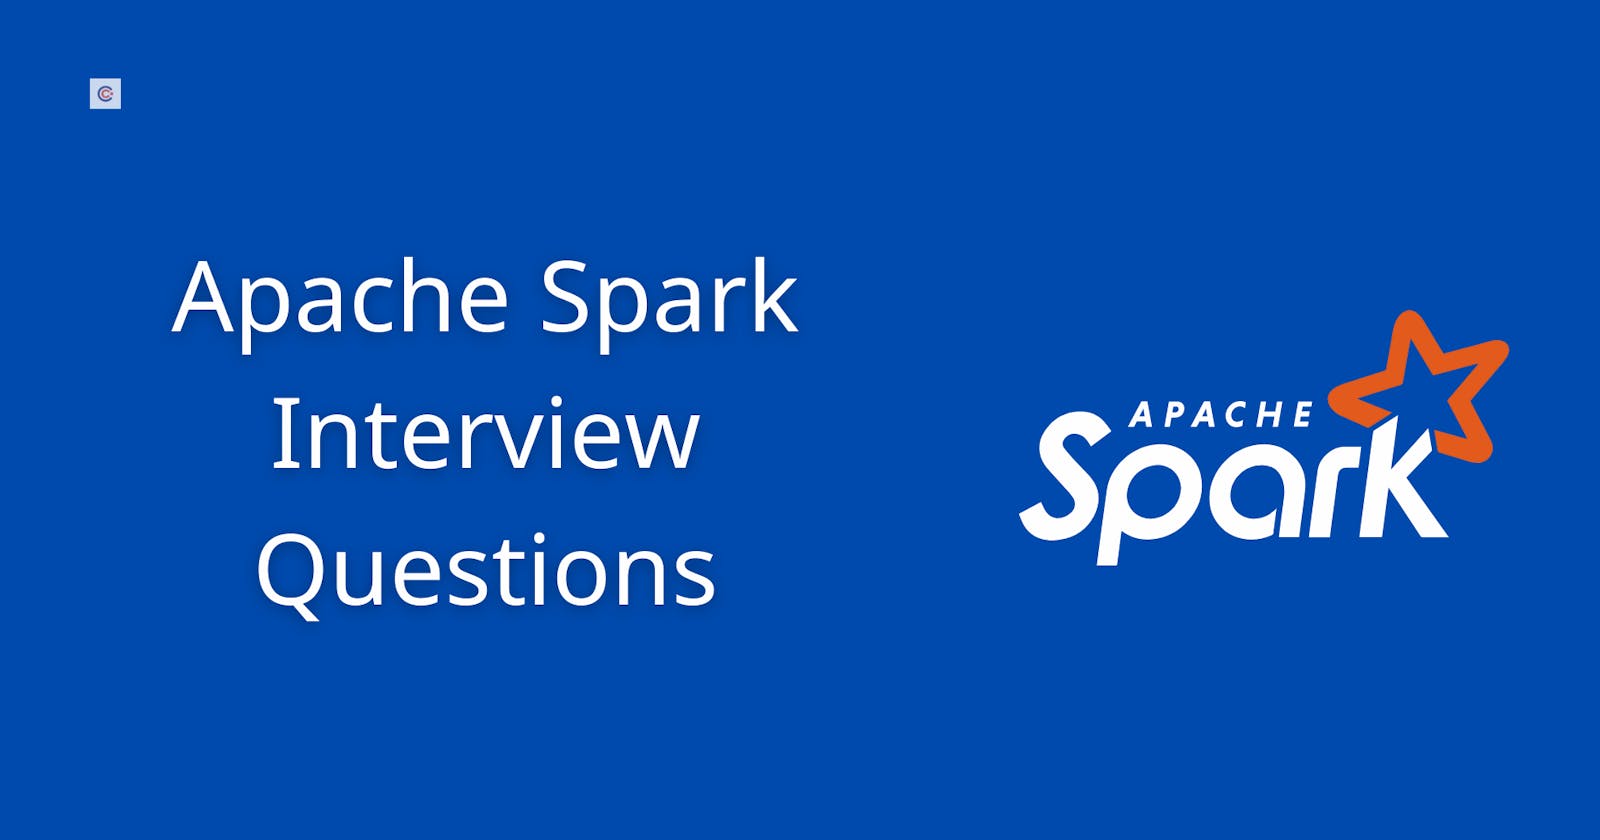 50 Best Apache Spark Interview Questions To Prepare in 2021